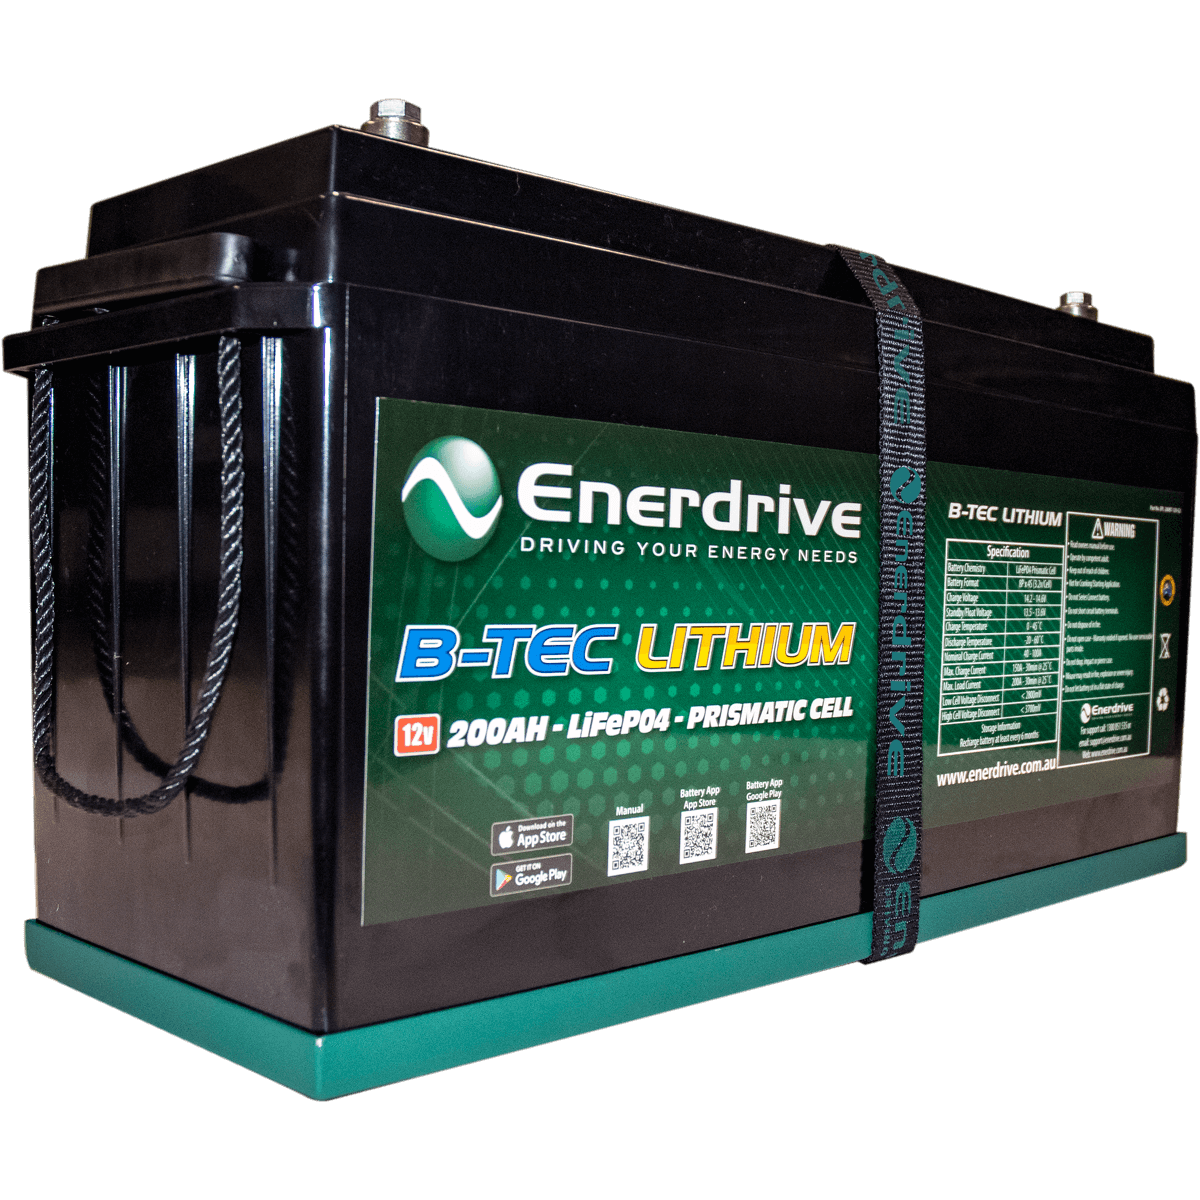 Enerdrive B-TEC LiFeP04 12v 200Ah Lithium Battery for off road caravan. Available in a variety of voltages and capacities at Jawa Camper Trailers Sunshine Coast Queensland to suit any caravan. Front view showing label.